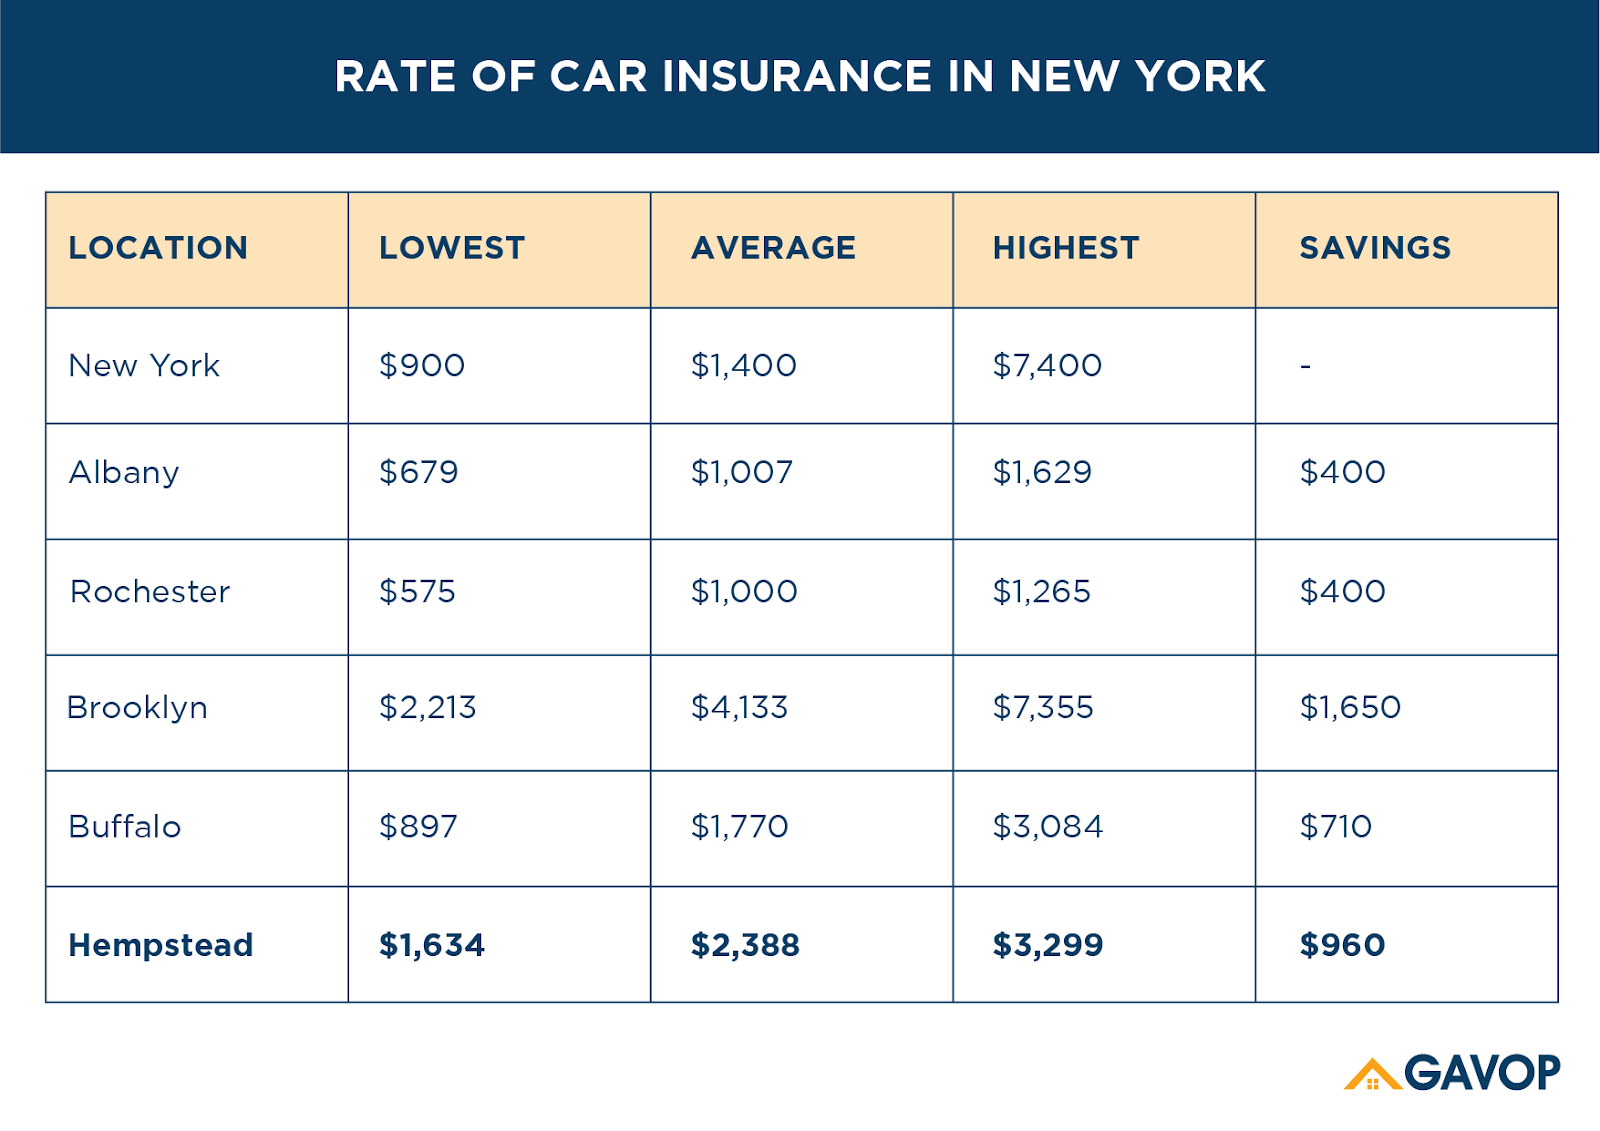 Factors Influencing The Rate of Car Insurance In Hempstead, NY